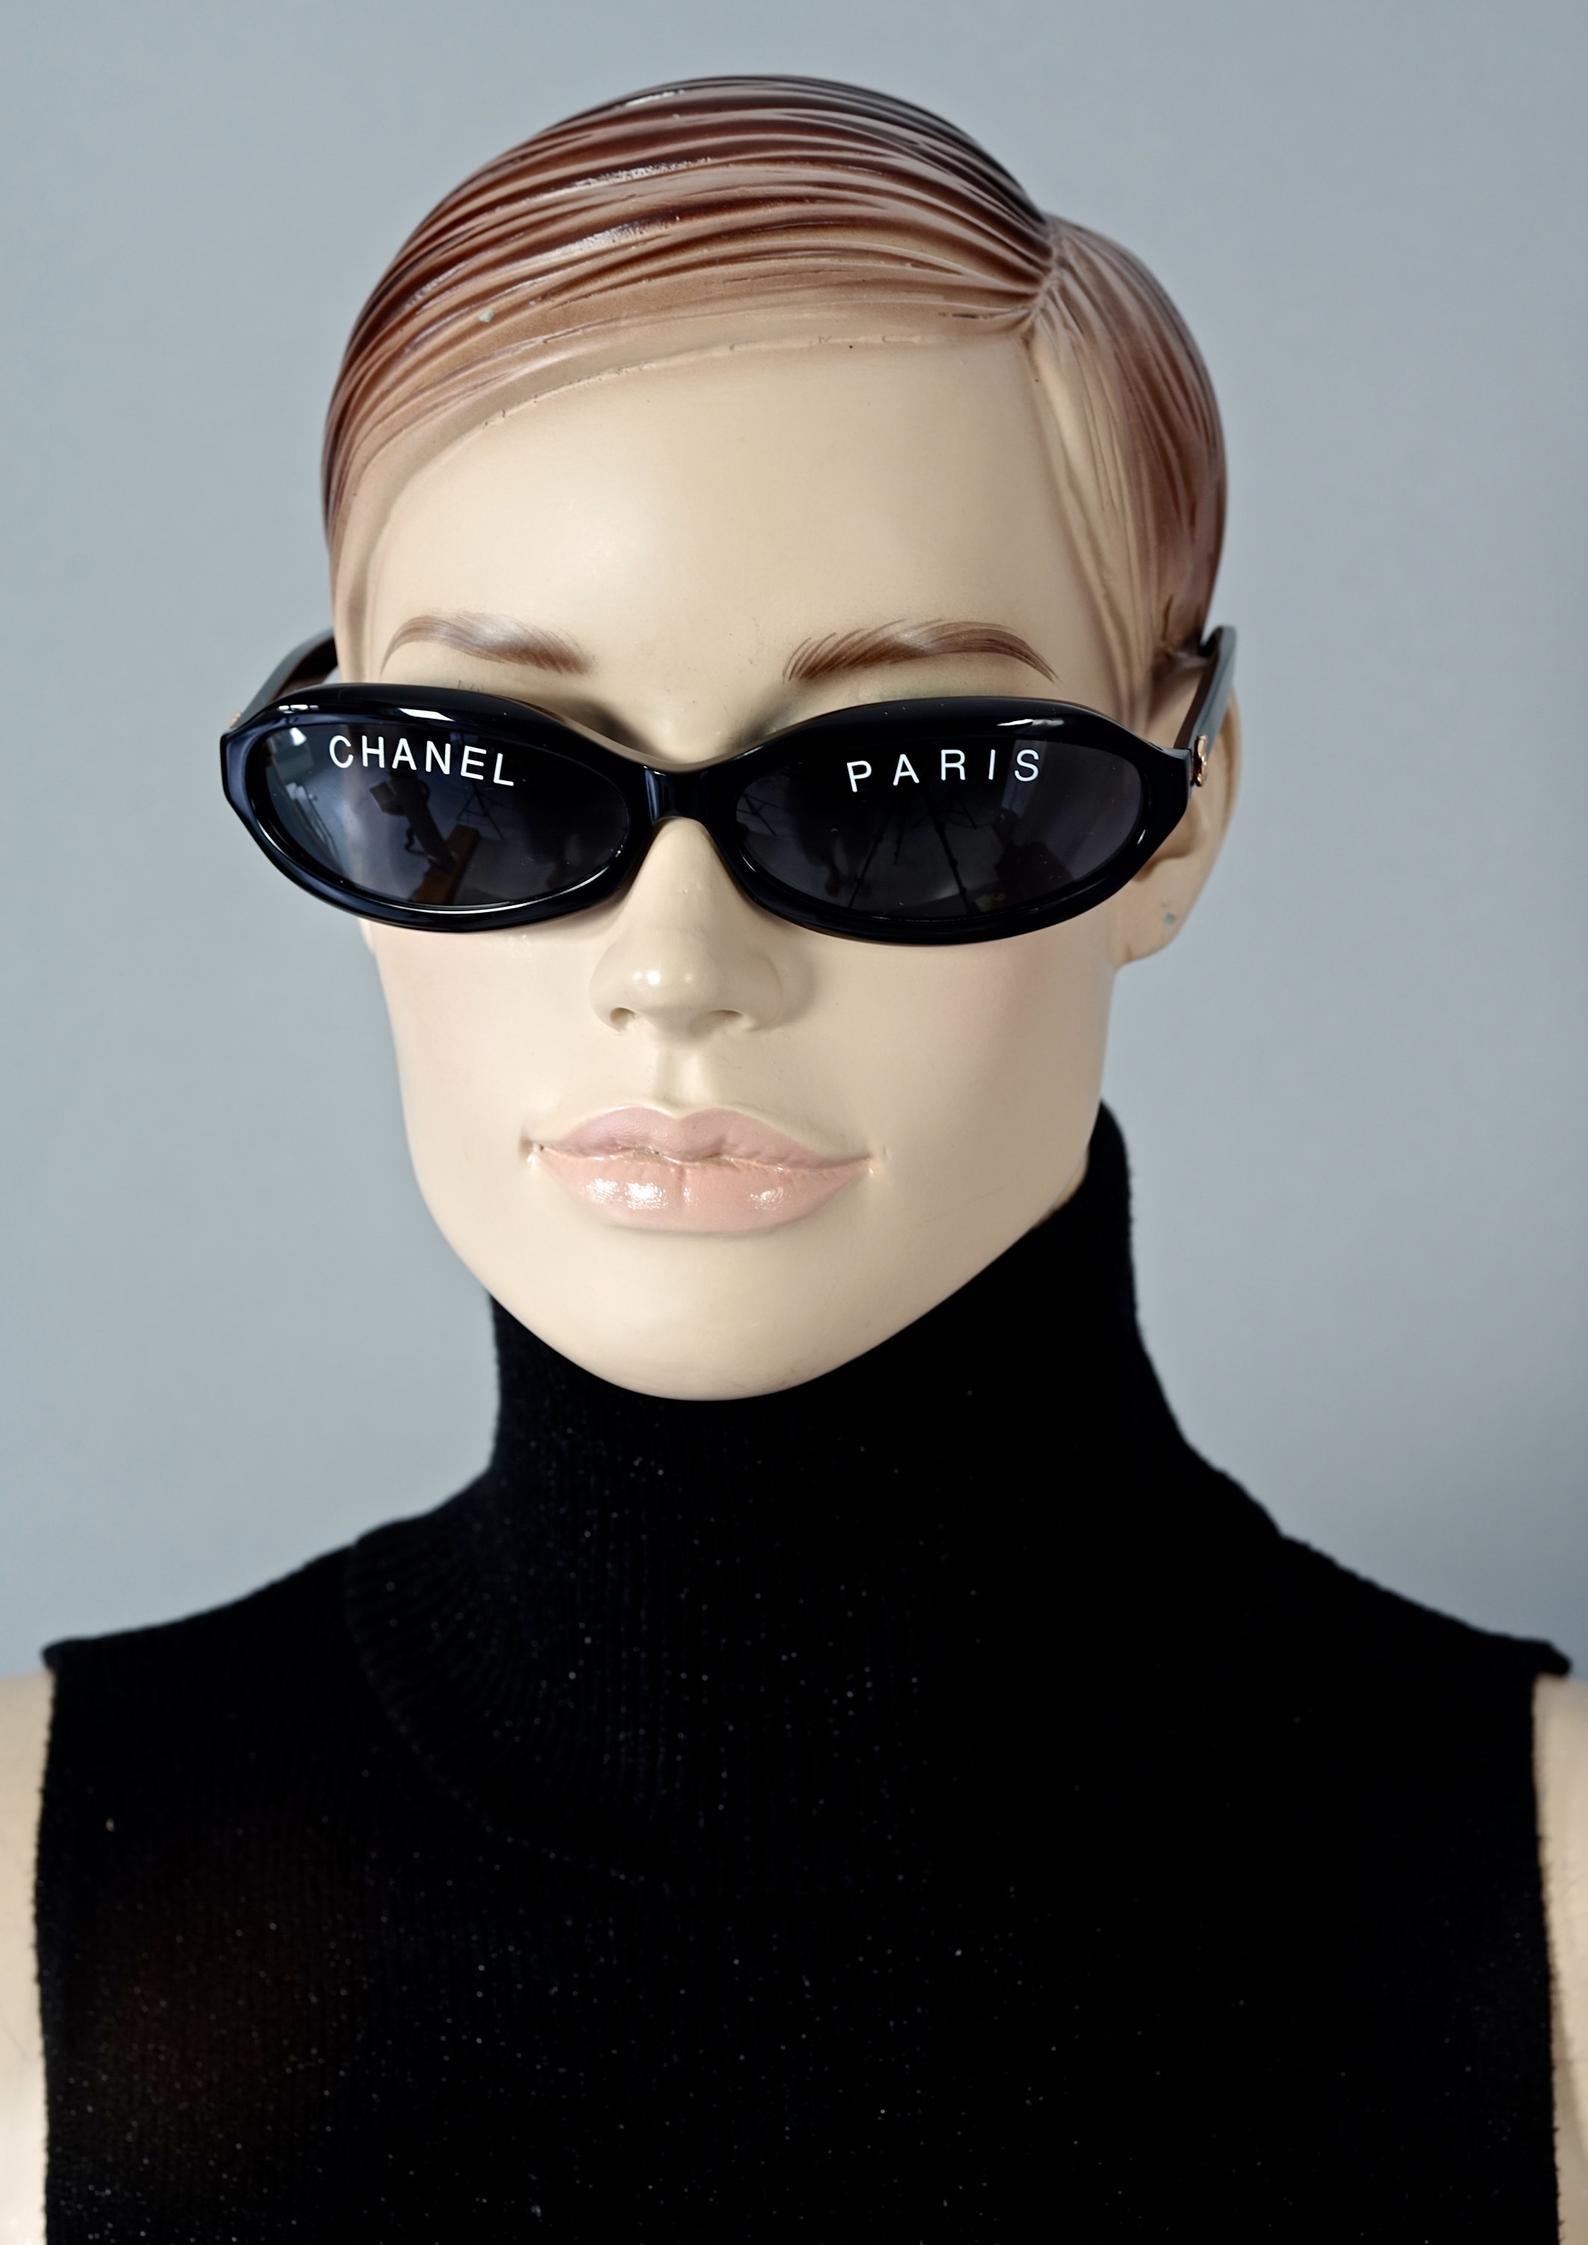 Vintage 1993 Iconic CHANEL PARIS Spelled Narrow Frame Black Sunglasses

Measurements:
Height: 1.57 inches (4 cm)
Frame Width: 5.63 inches (14.3 cm)
Temples: 5.11 inches (13 cm)

From CHANEL Spring/ Summer 1993 collection.

Features:
- 100% Authentic